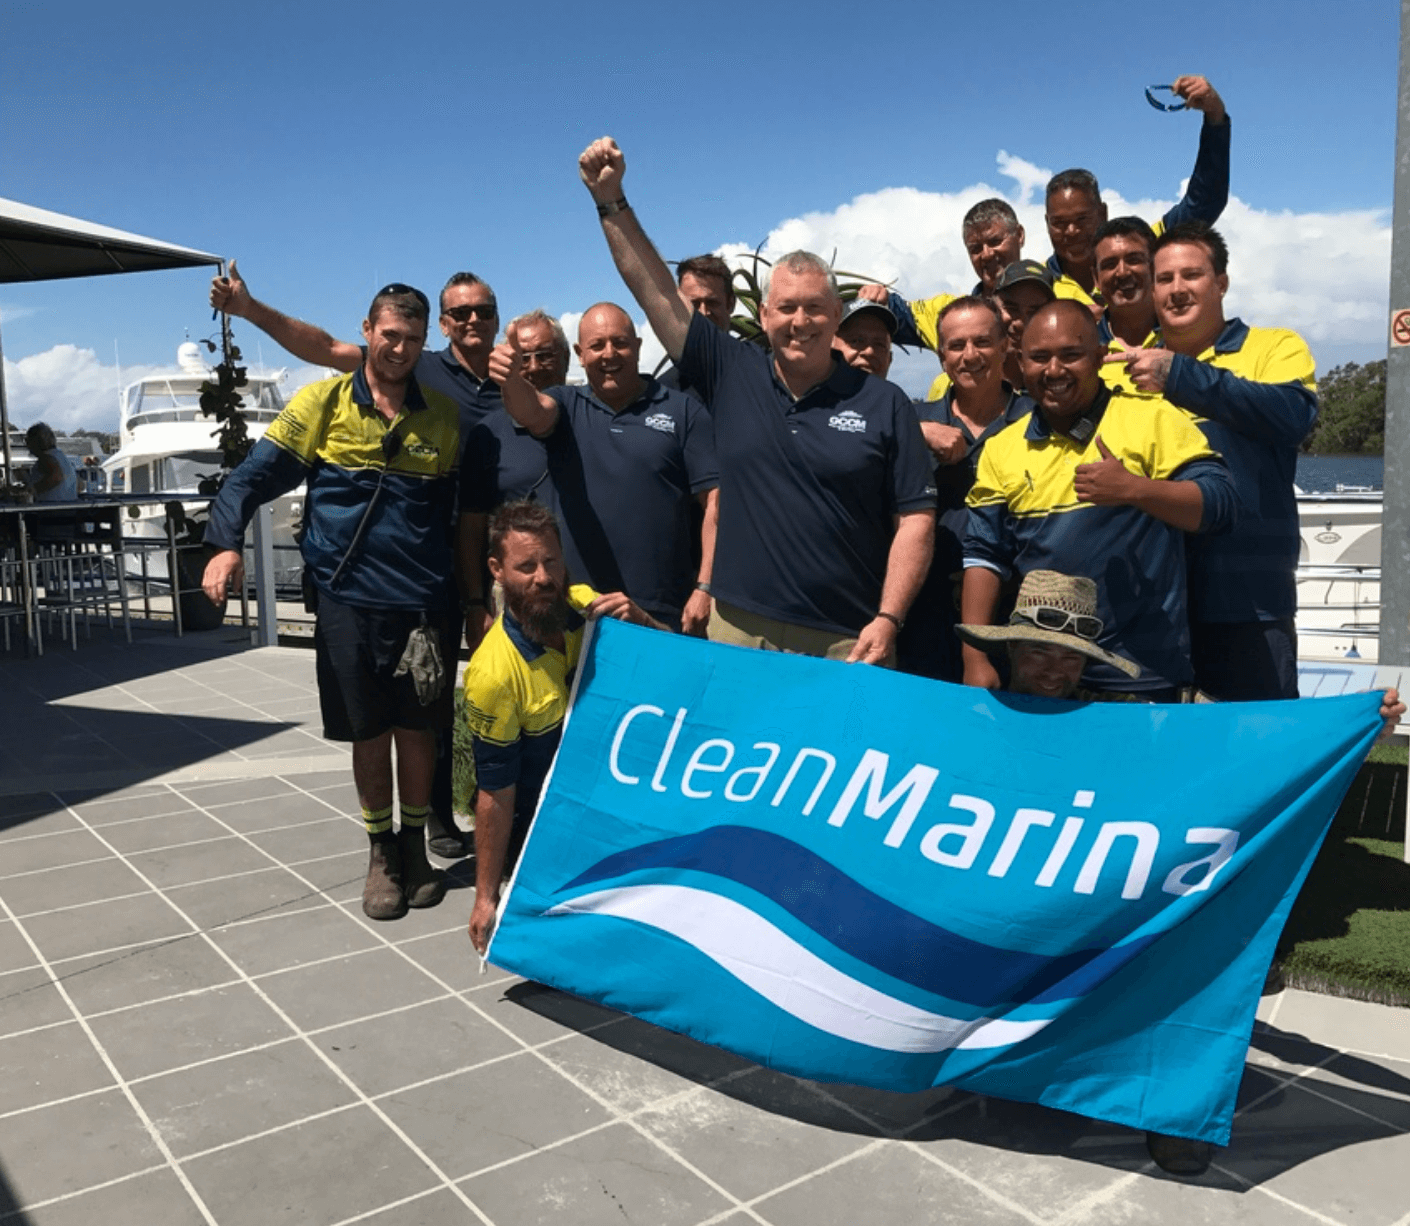 We've received a 100% score on our last two Clean Marina audits - a great result from a great team!